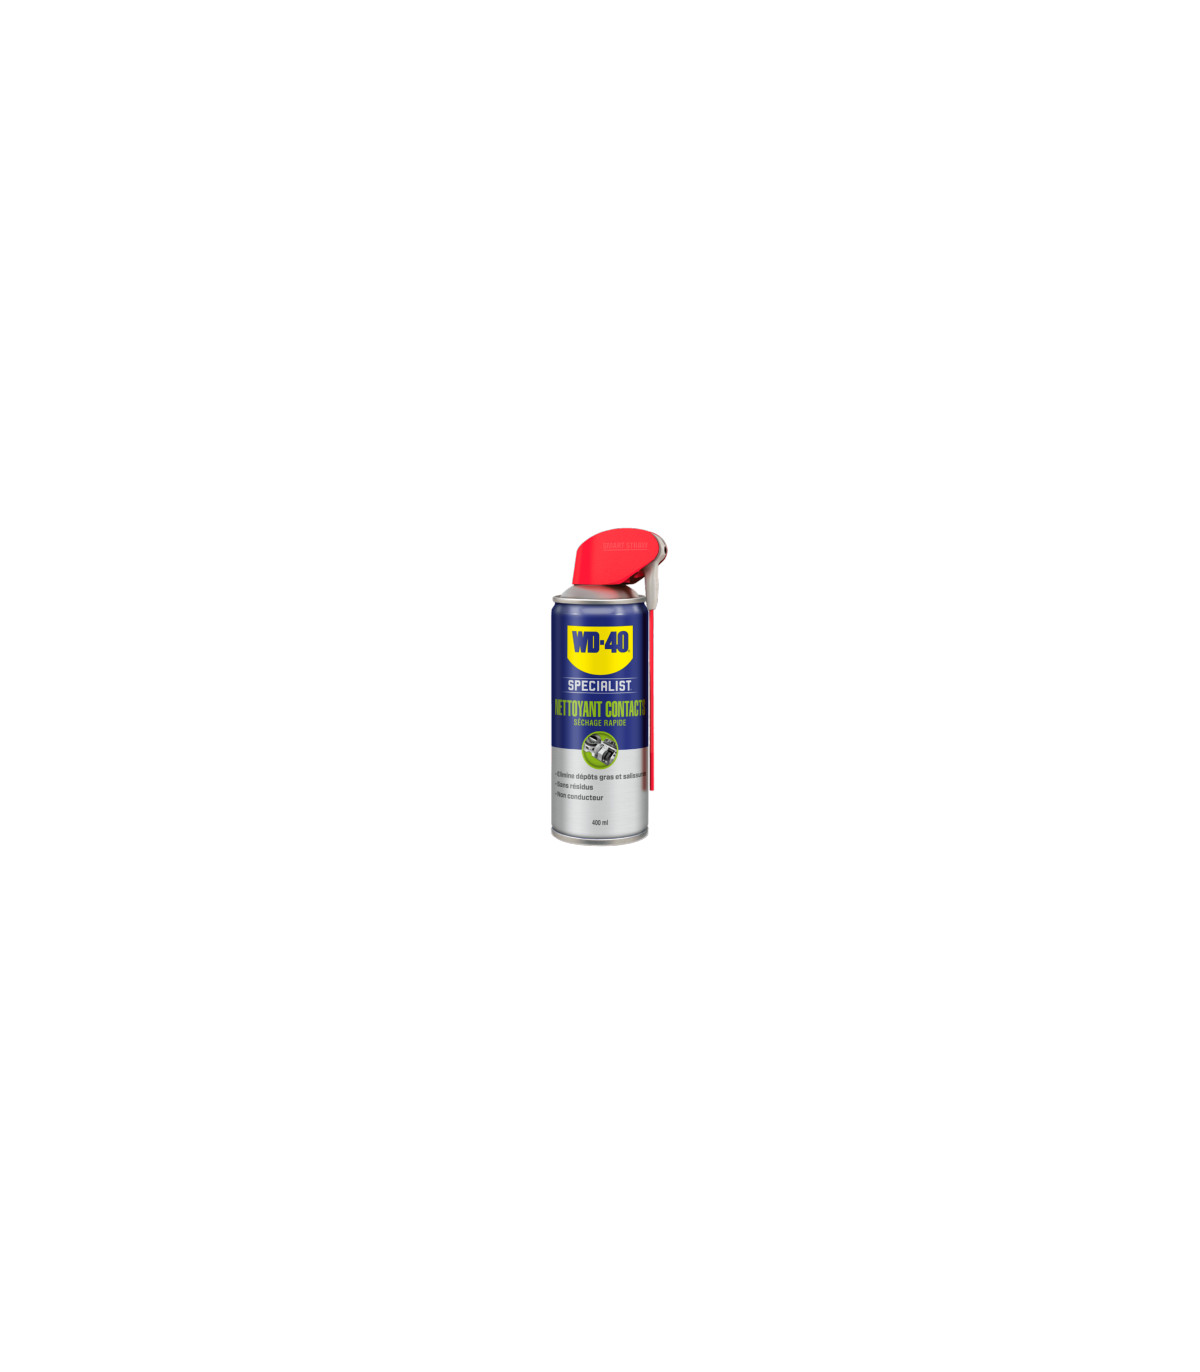 WD-40 Spray nettoyant Contacts 400ml - Prophot